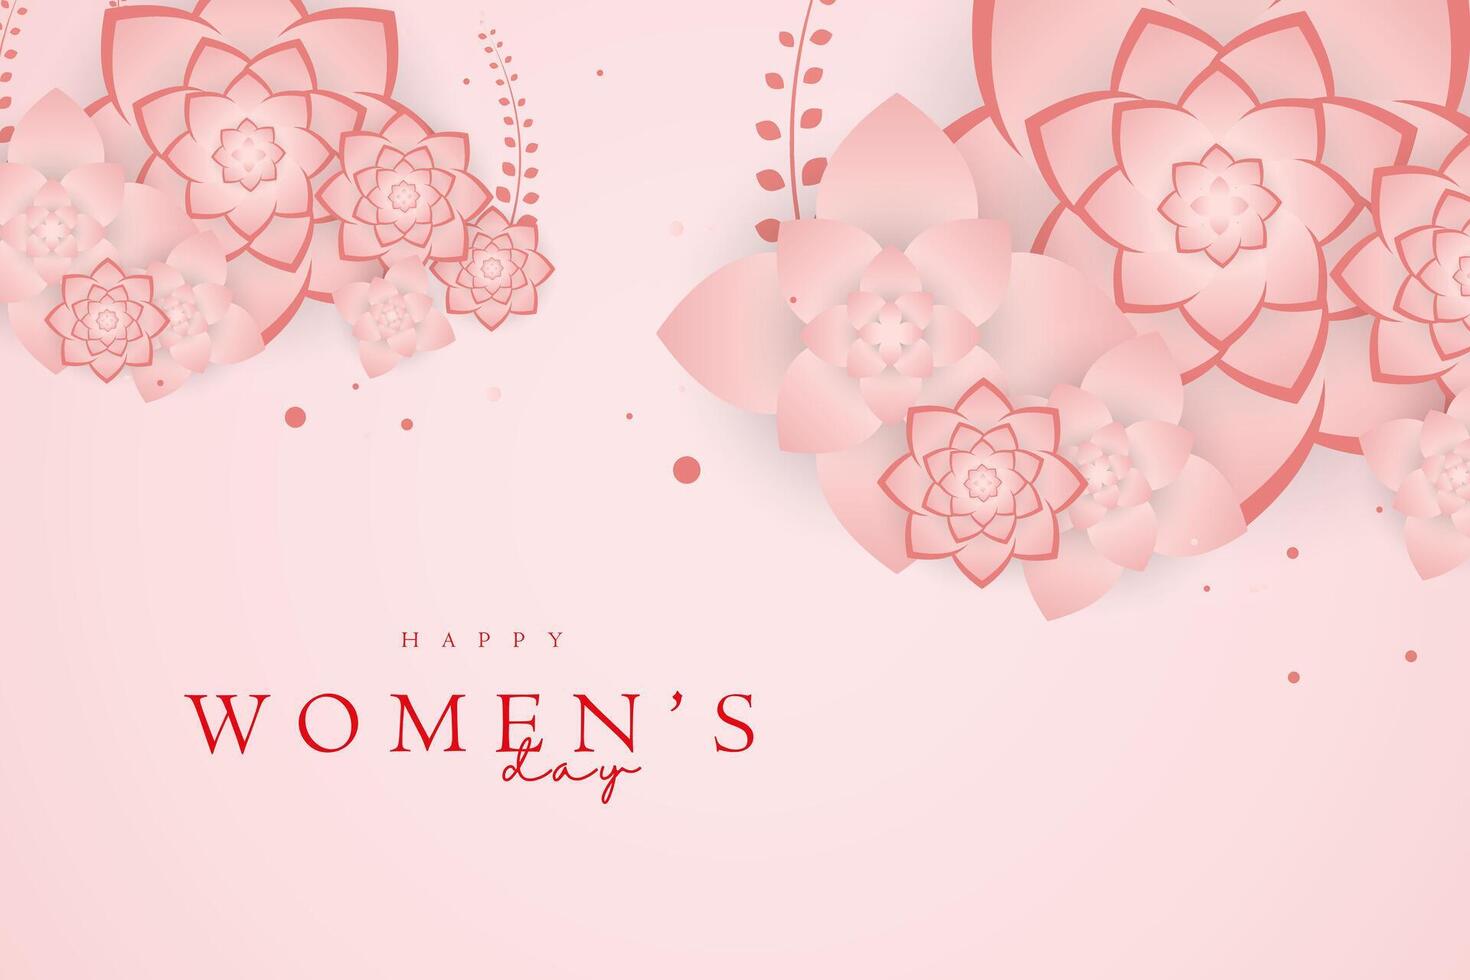 pink flower for International women's day floral decorations on gradient pink background used in Greeting card on pastel pink color with text vector